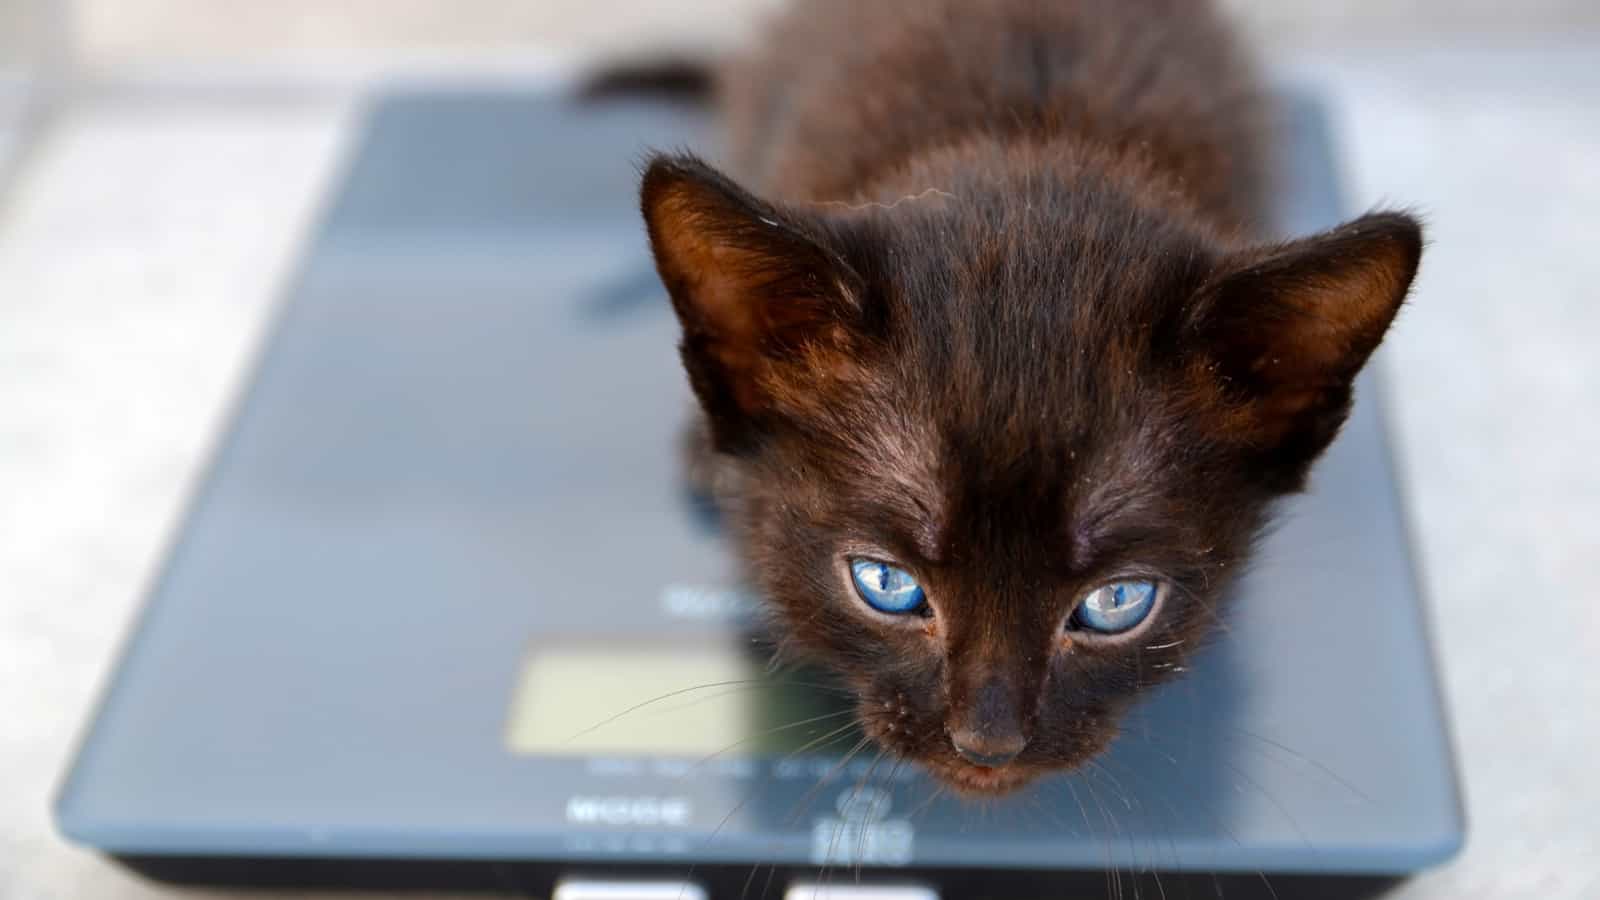 Cute fluffy black kitten is weighed on scale.Vet medicine for animals, pets health care concept.Selective focus.